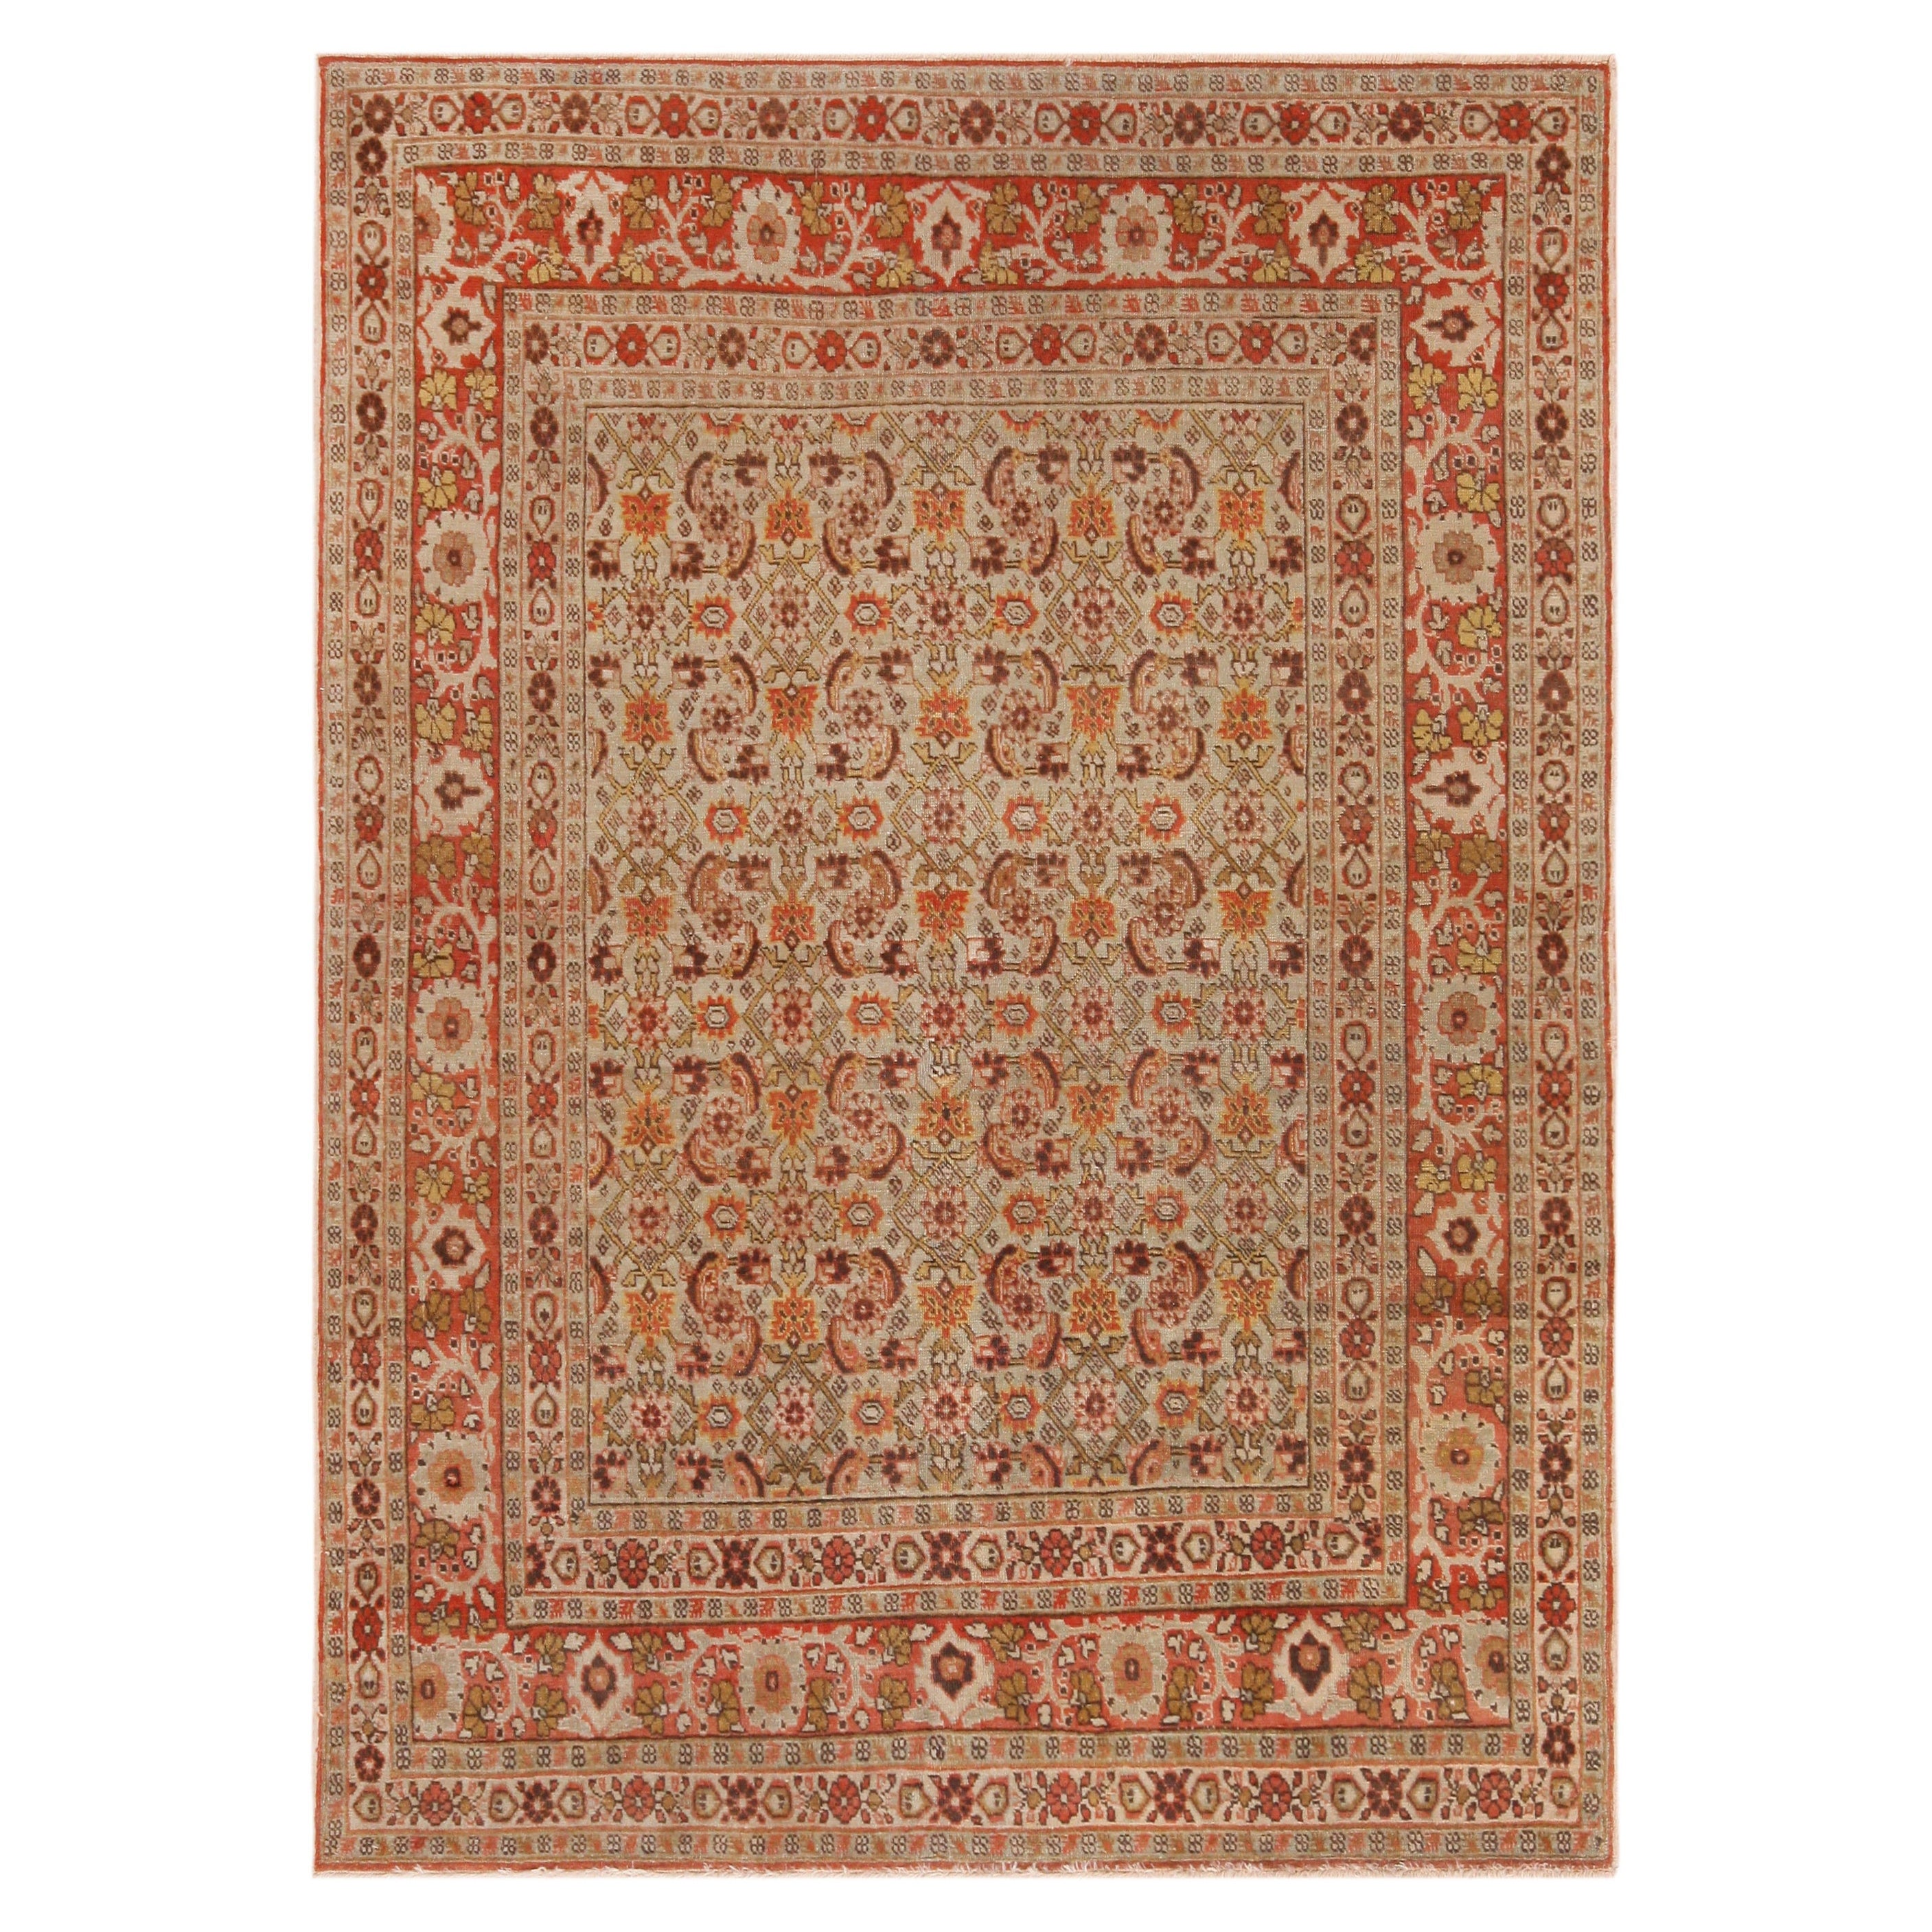 Antique Persian Tabriz Herati Rug. 4 ft 2 in x 5 ft 9 in For Sale